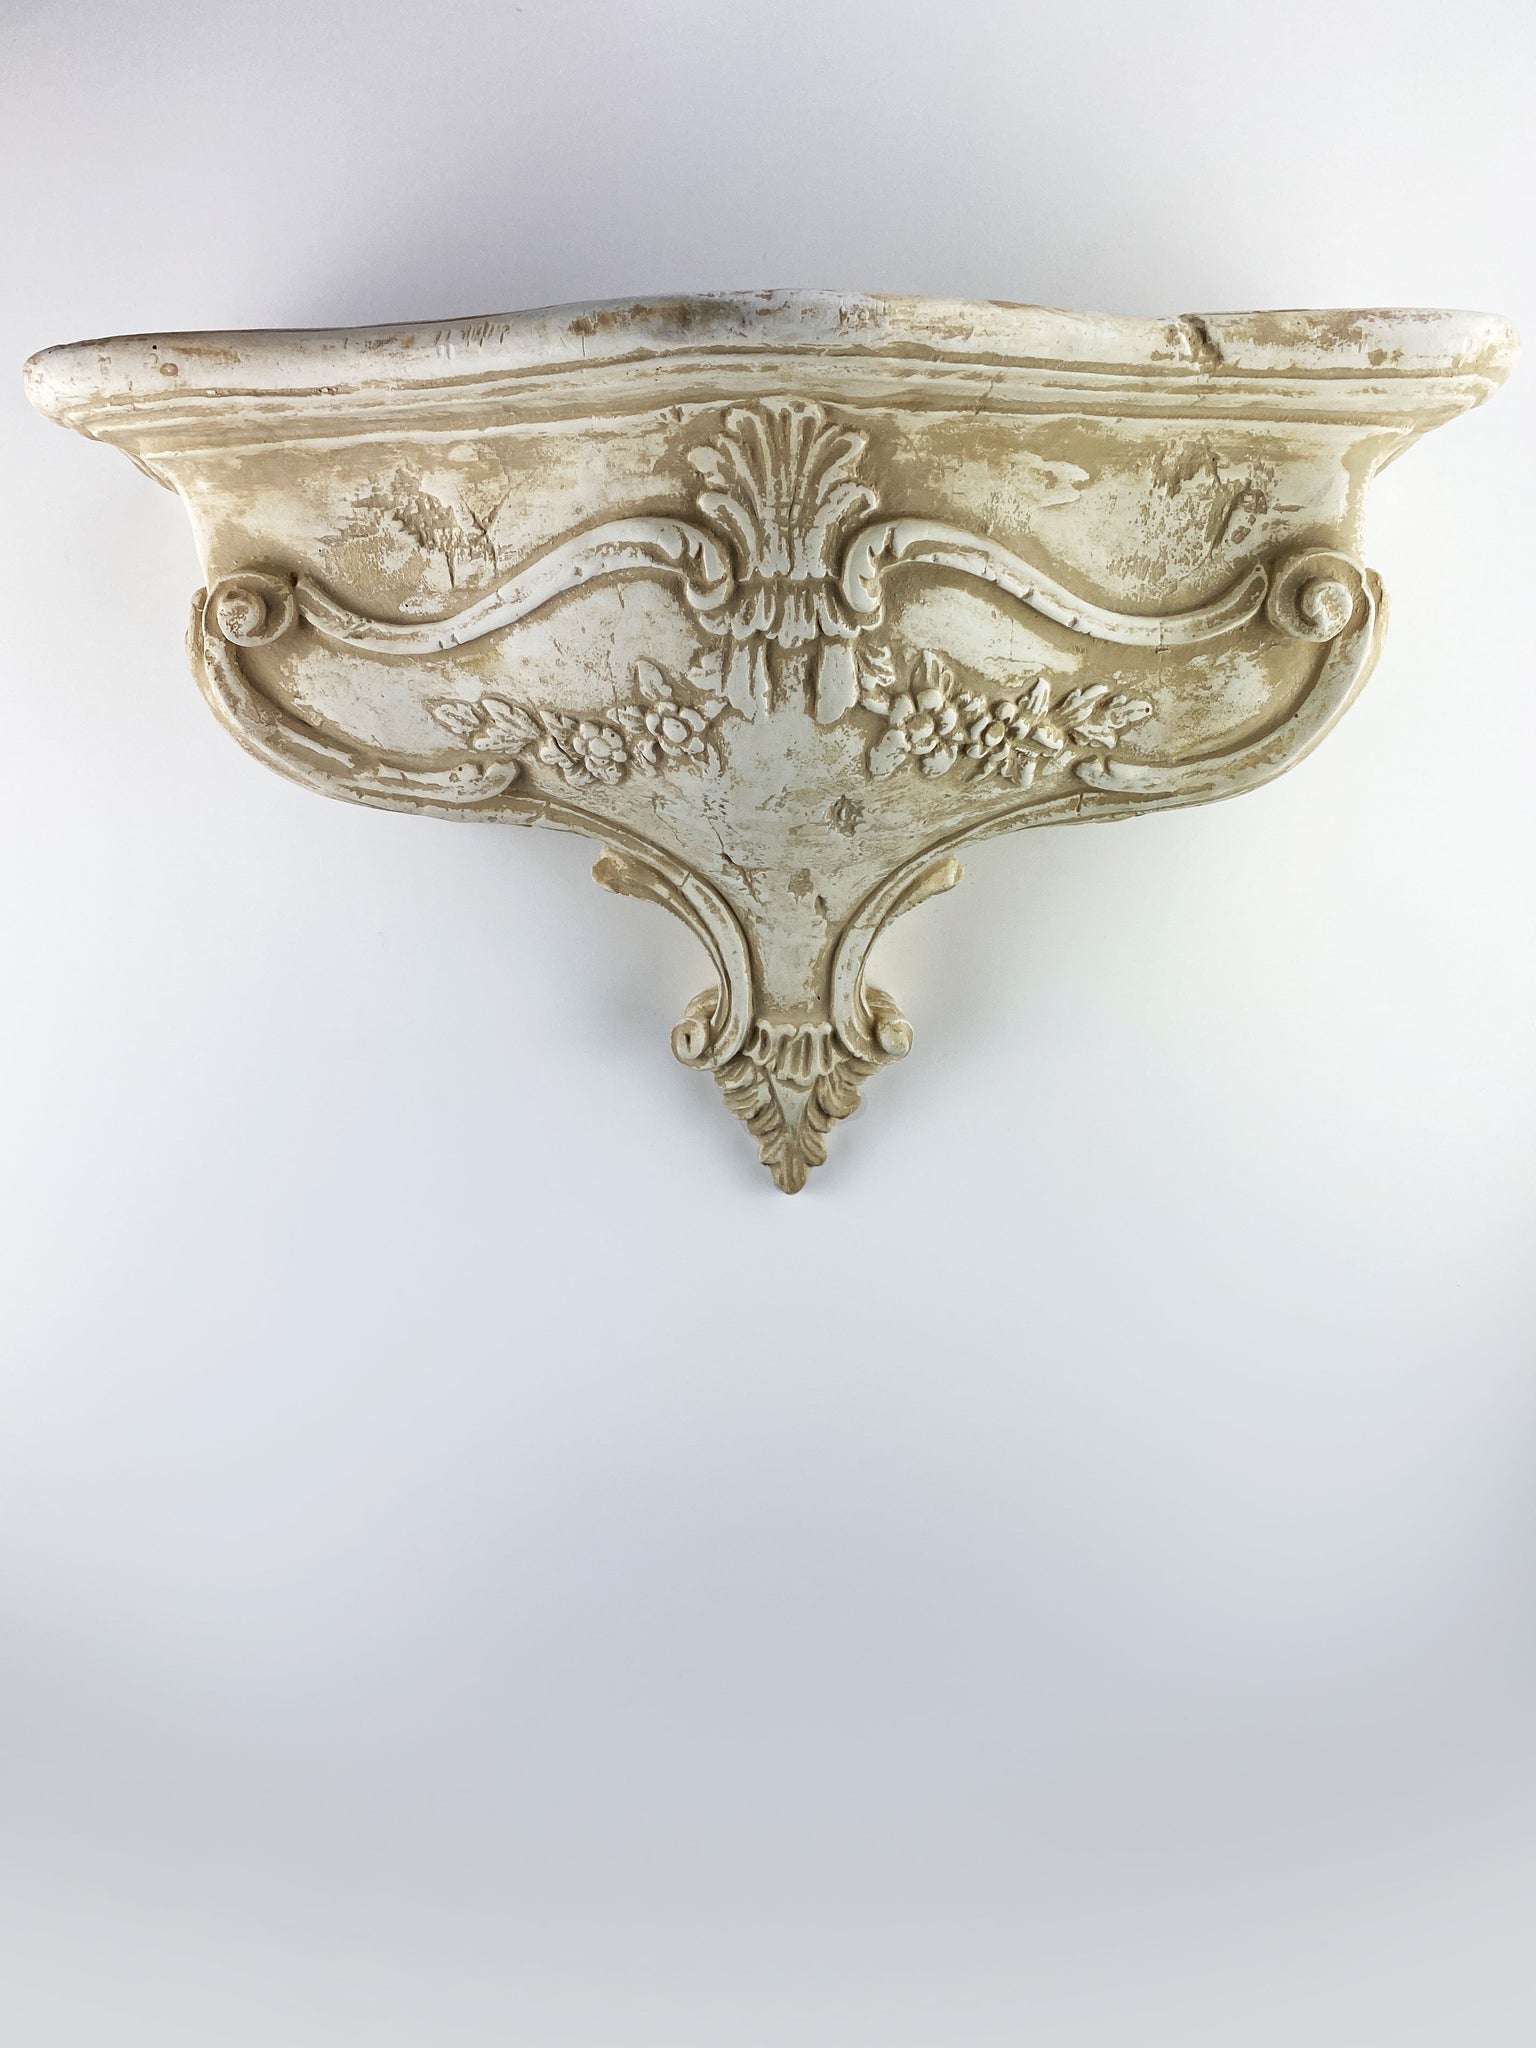 Vintage Victorian Flowers and Shell Bracket